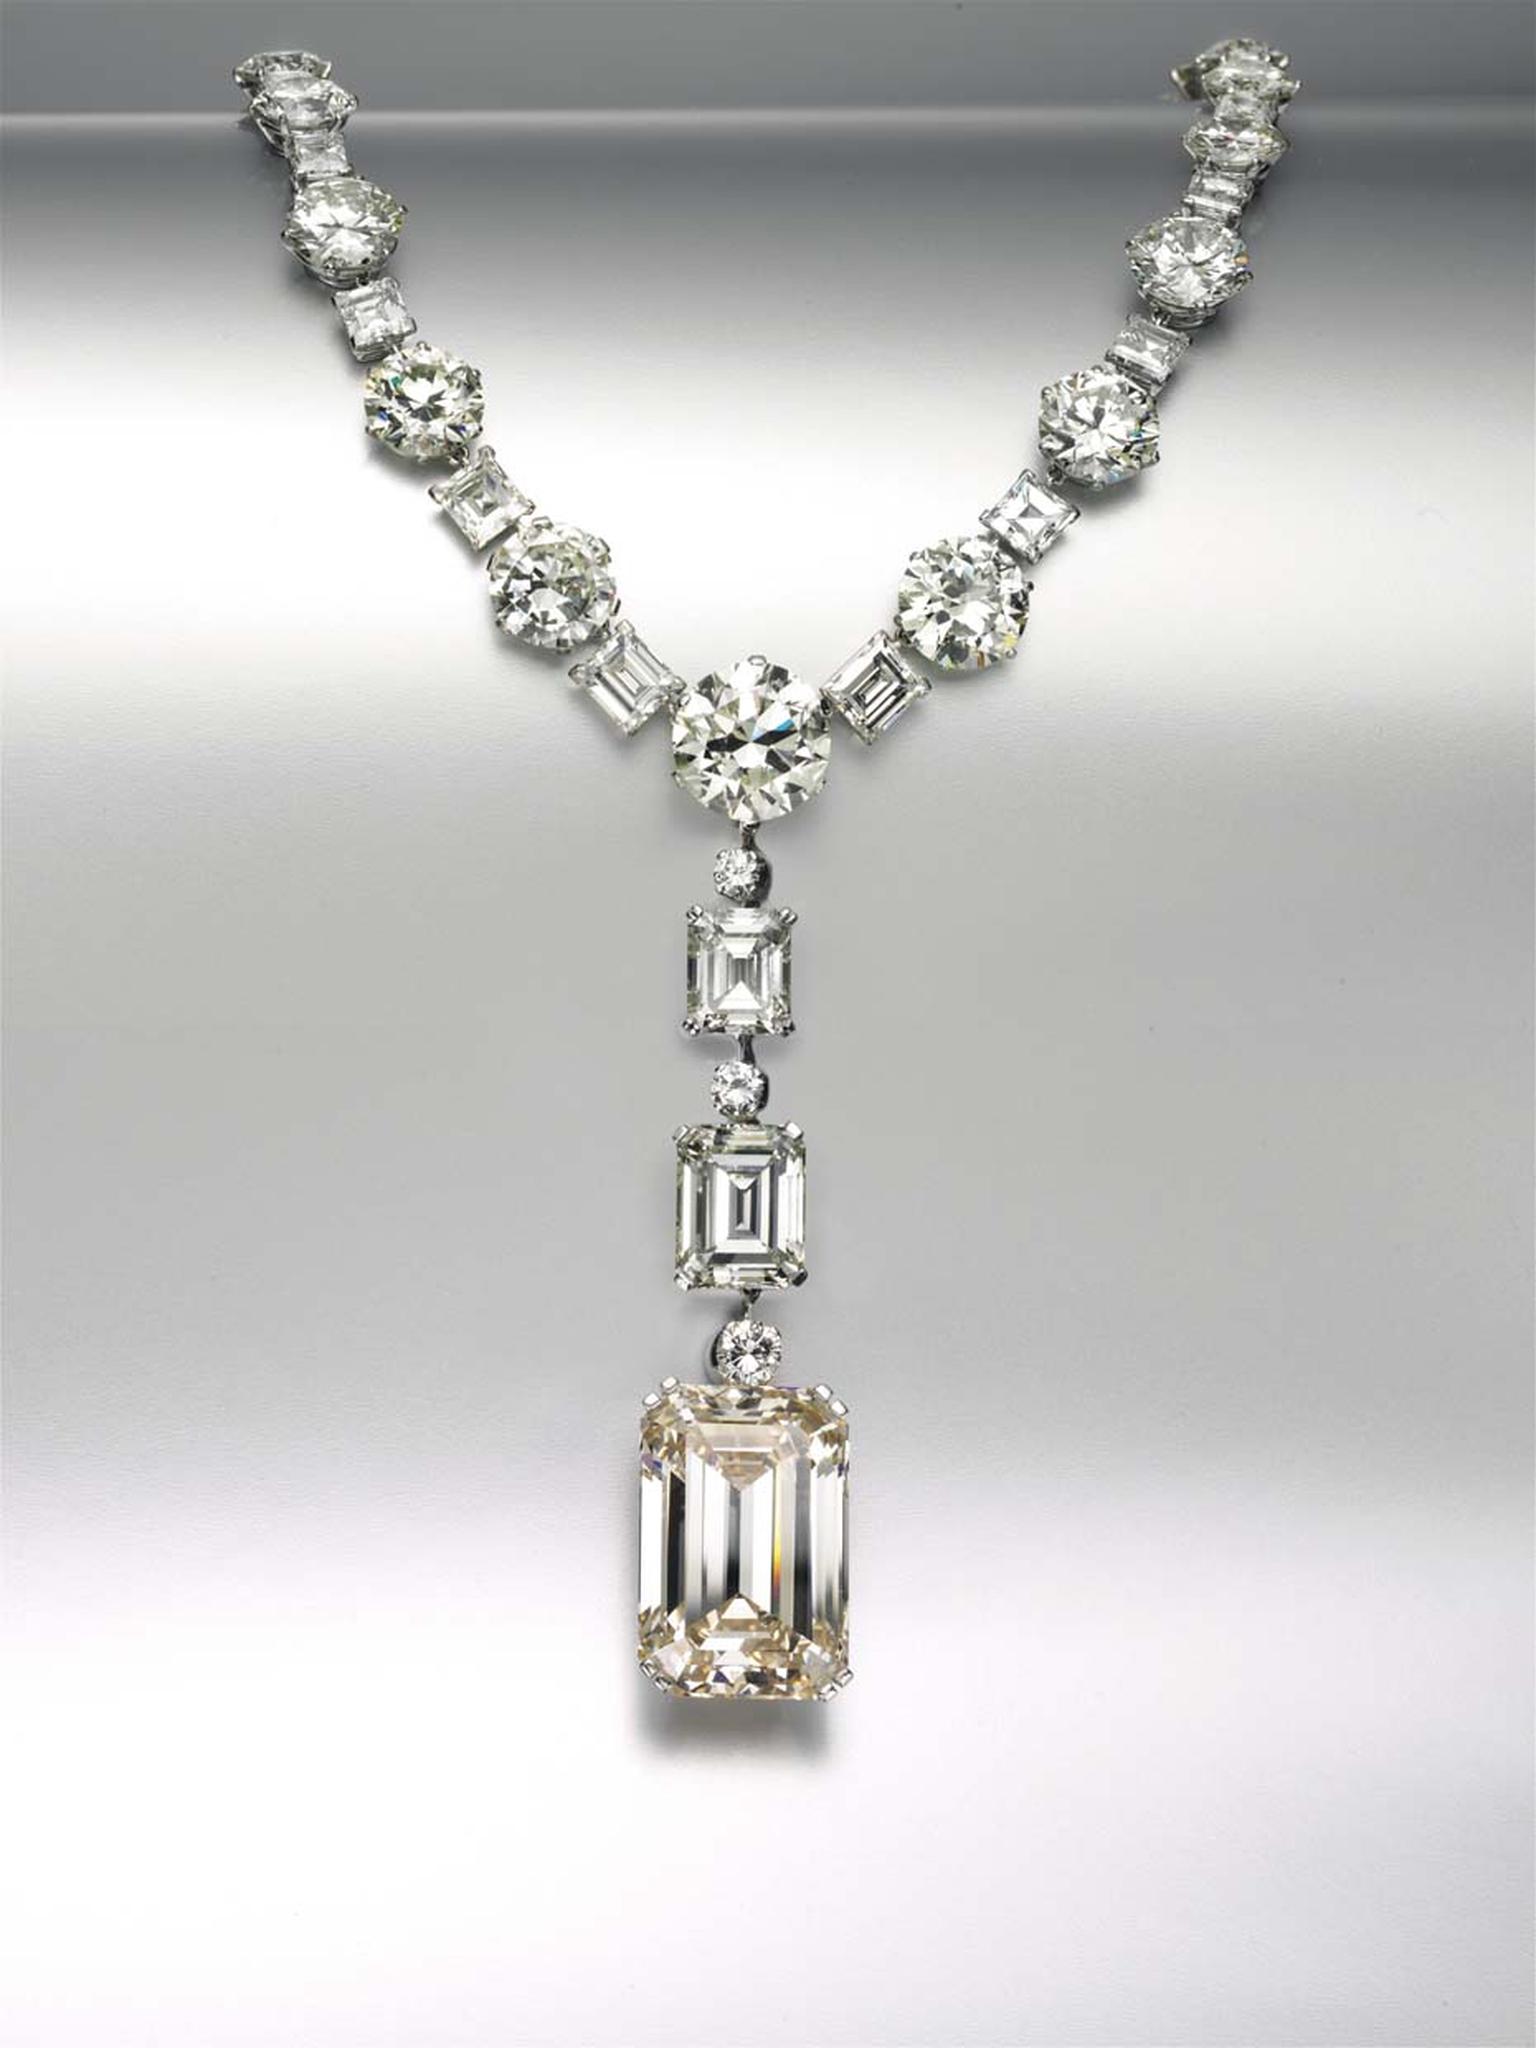 Christie’s New York kicked of their fall auction season with the sale of 350 Important Jewels, led by this stunning necklace topped by a flawless 81.38ct diamond achieving a price of $3,189,000.